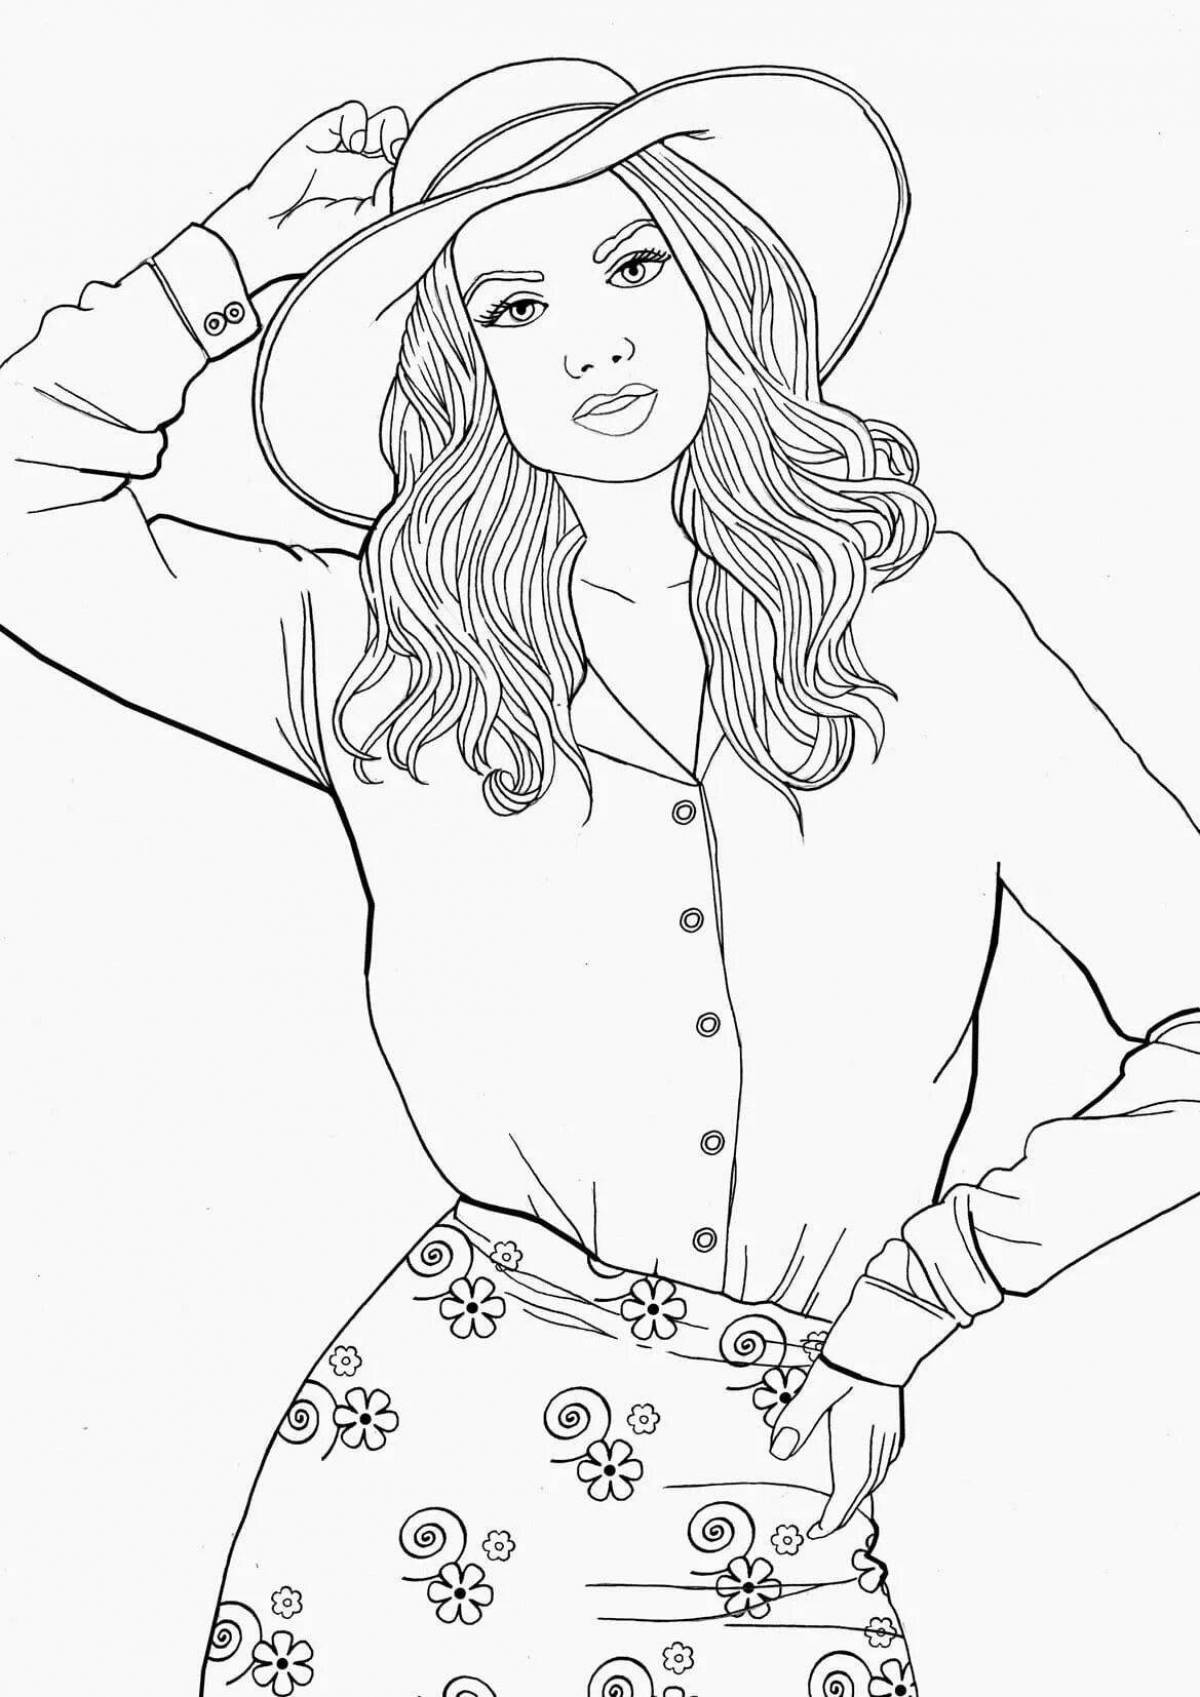 13 Years Bright Modern Coloring Page